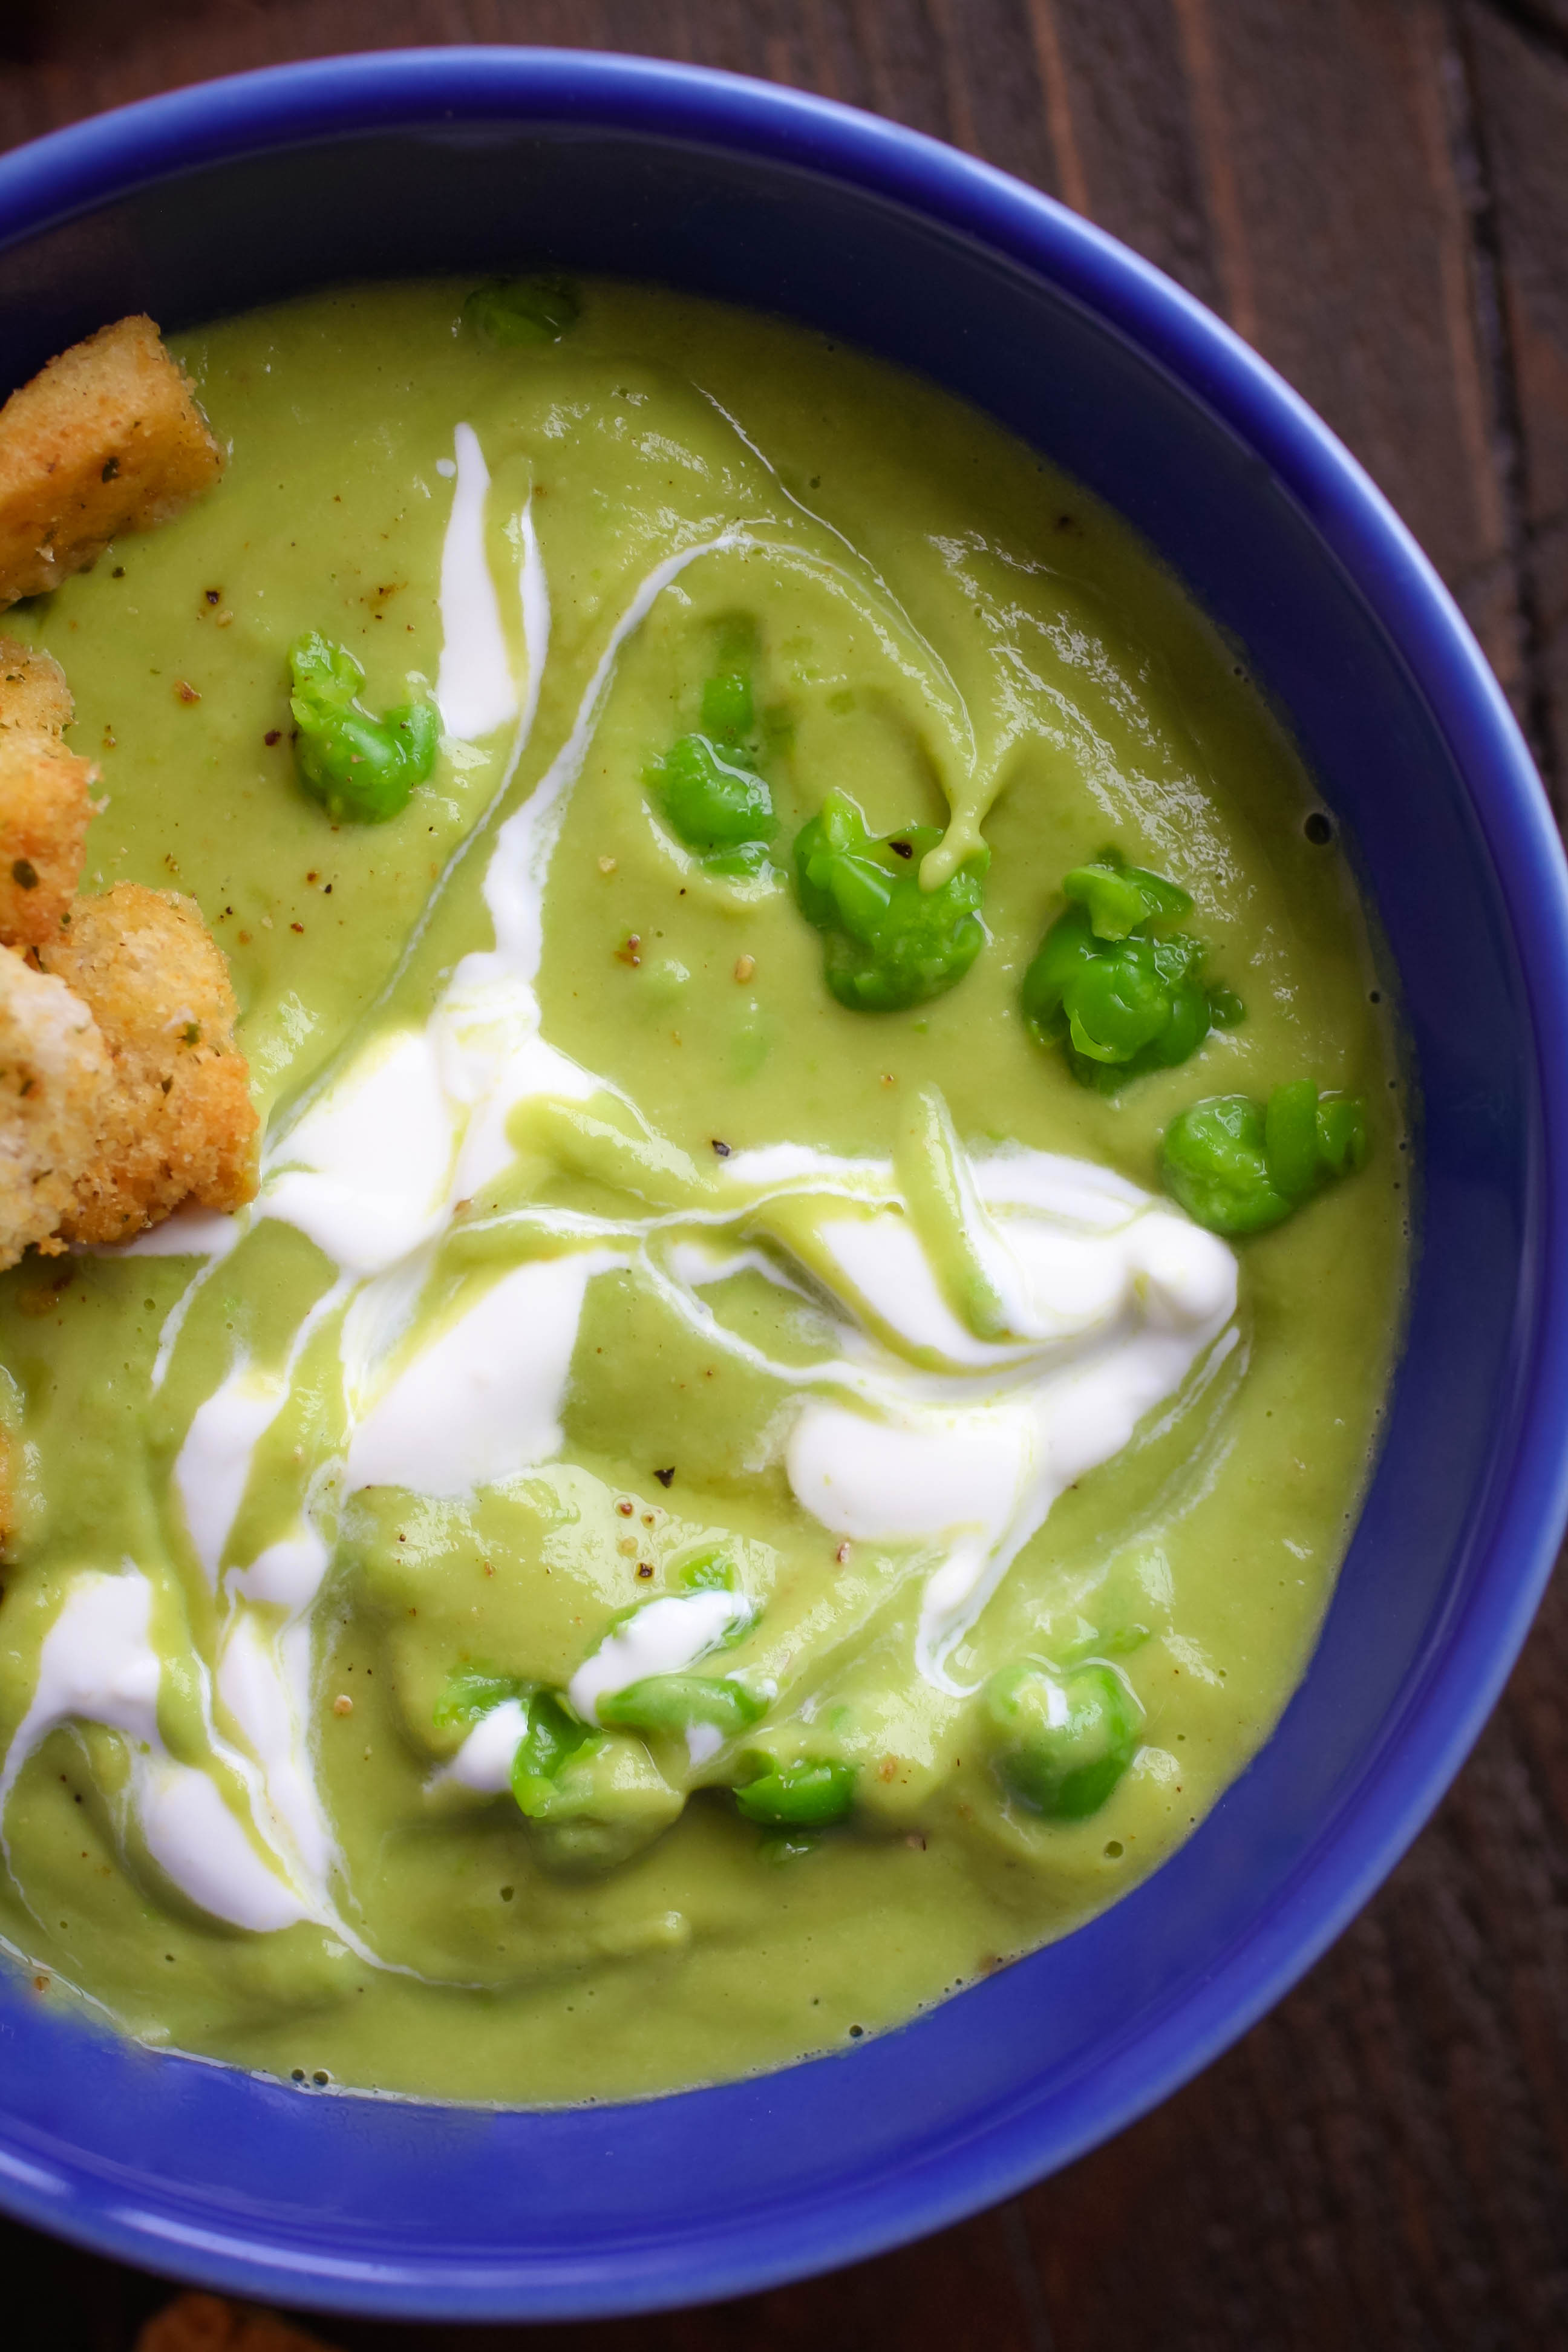 Warm Avocado and Pea Soup make a great addition to a light meal. Warm Avocado and Pea Soup is so colorful and flavorful!